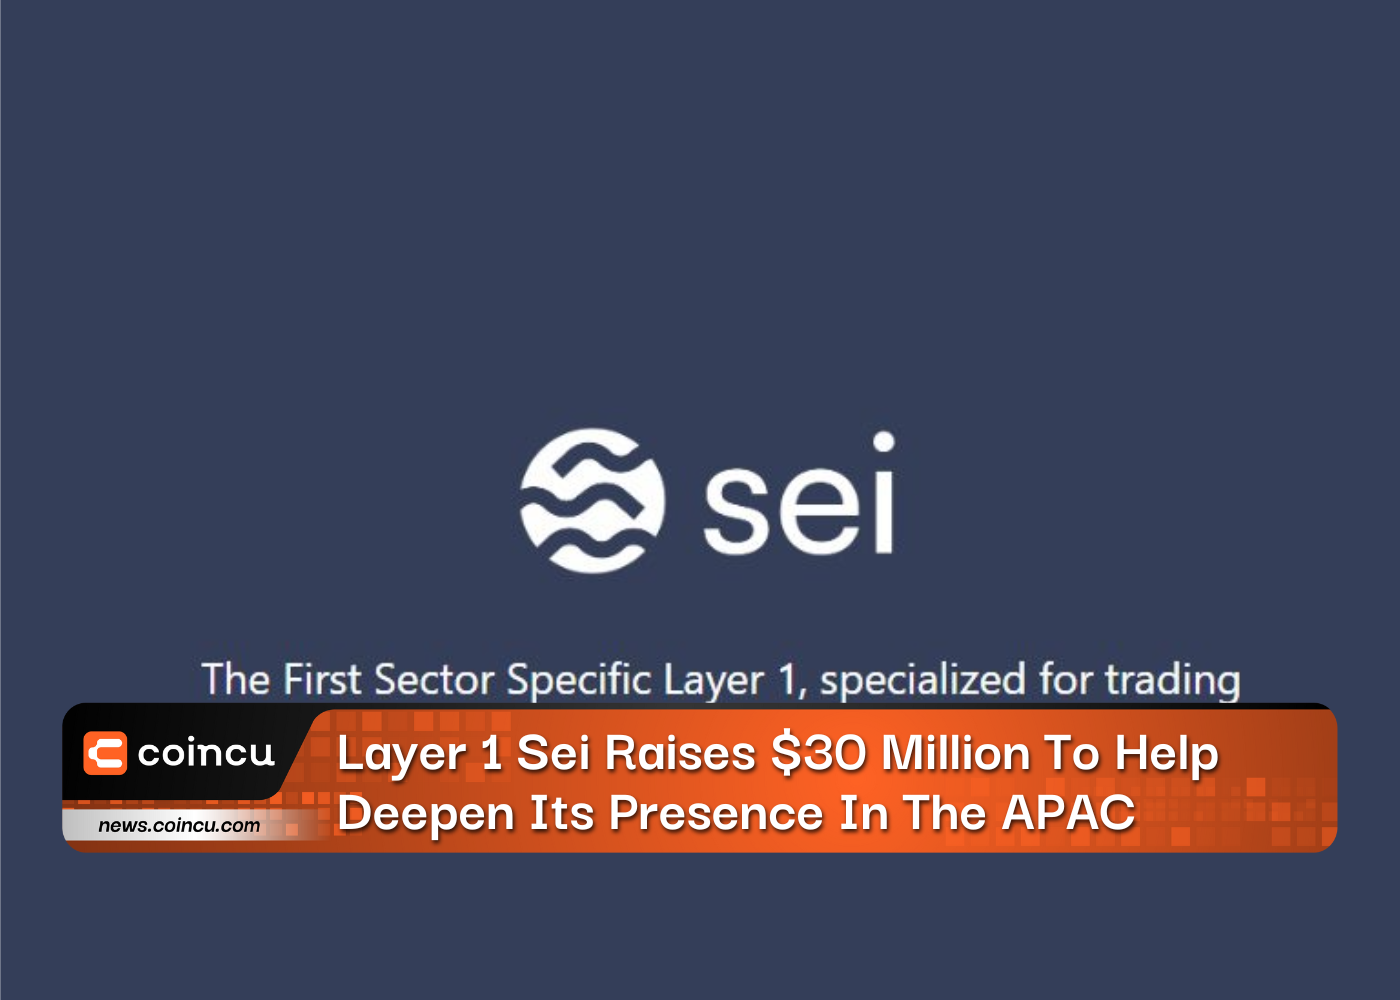 Layer 1 Sei Raises $30 Million To Help Deepen Its Presence In The APAC